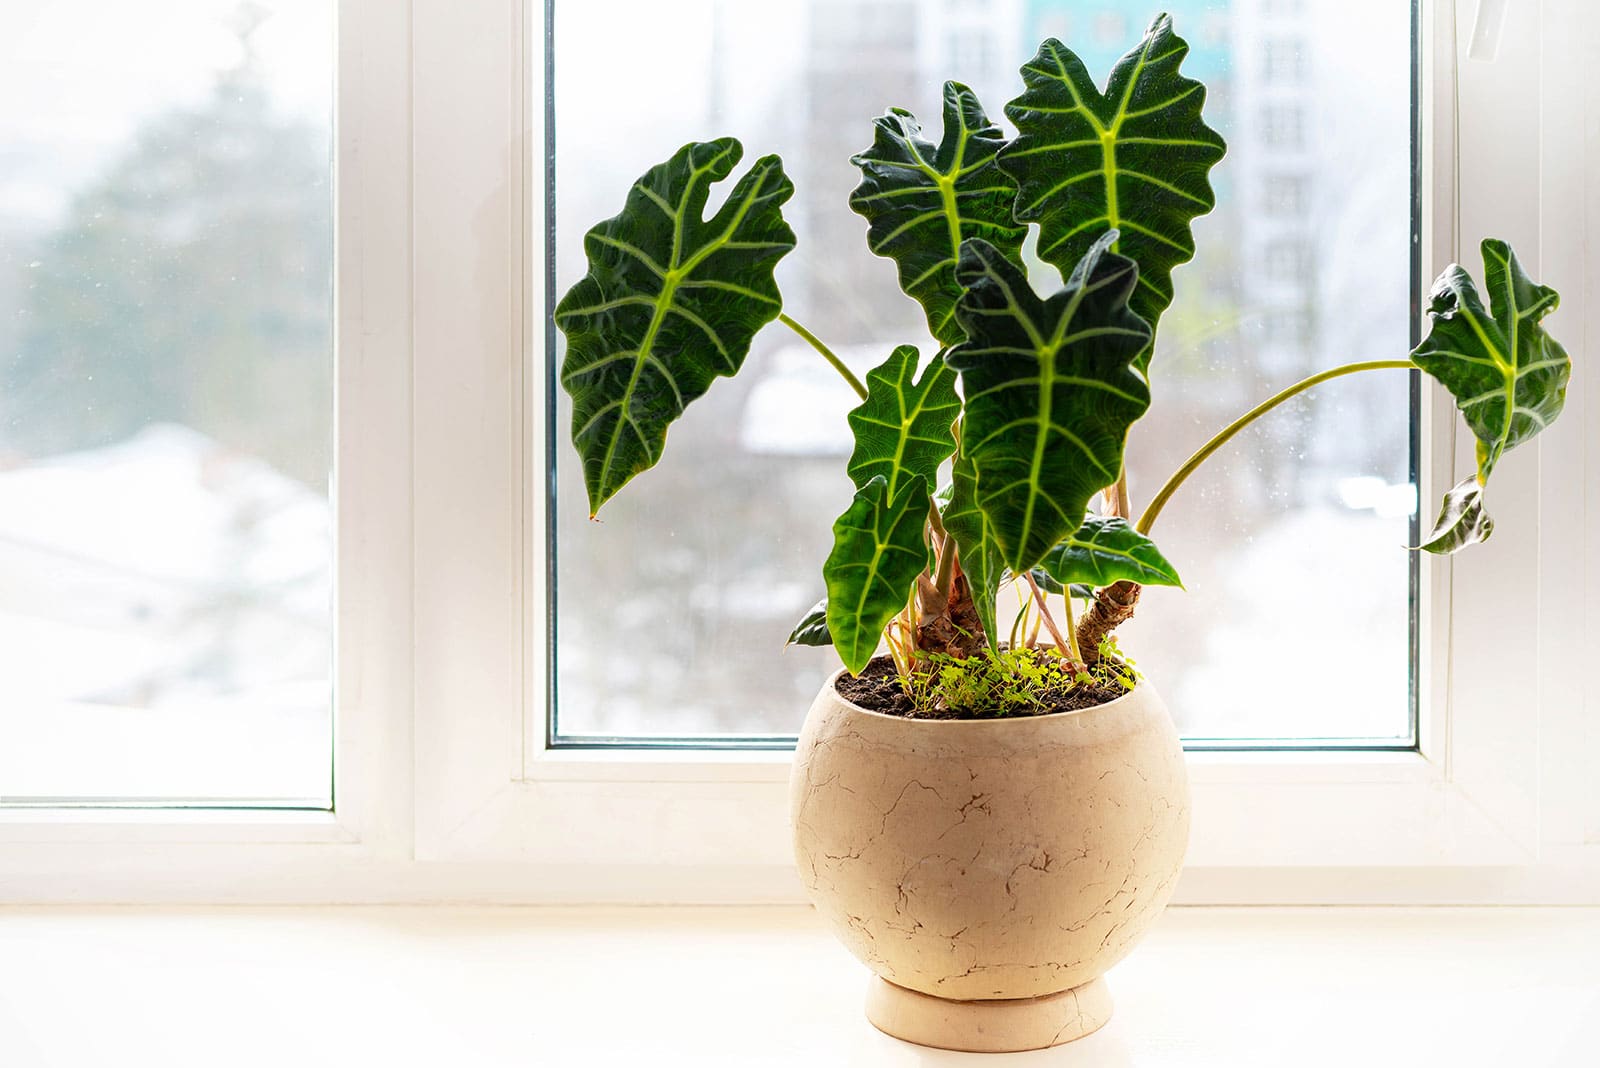 Beginner's guide to caring for Alocasia Polly (African mask plant)